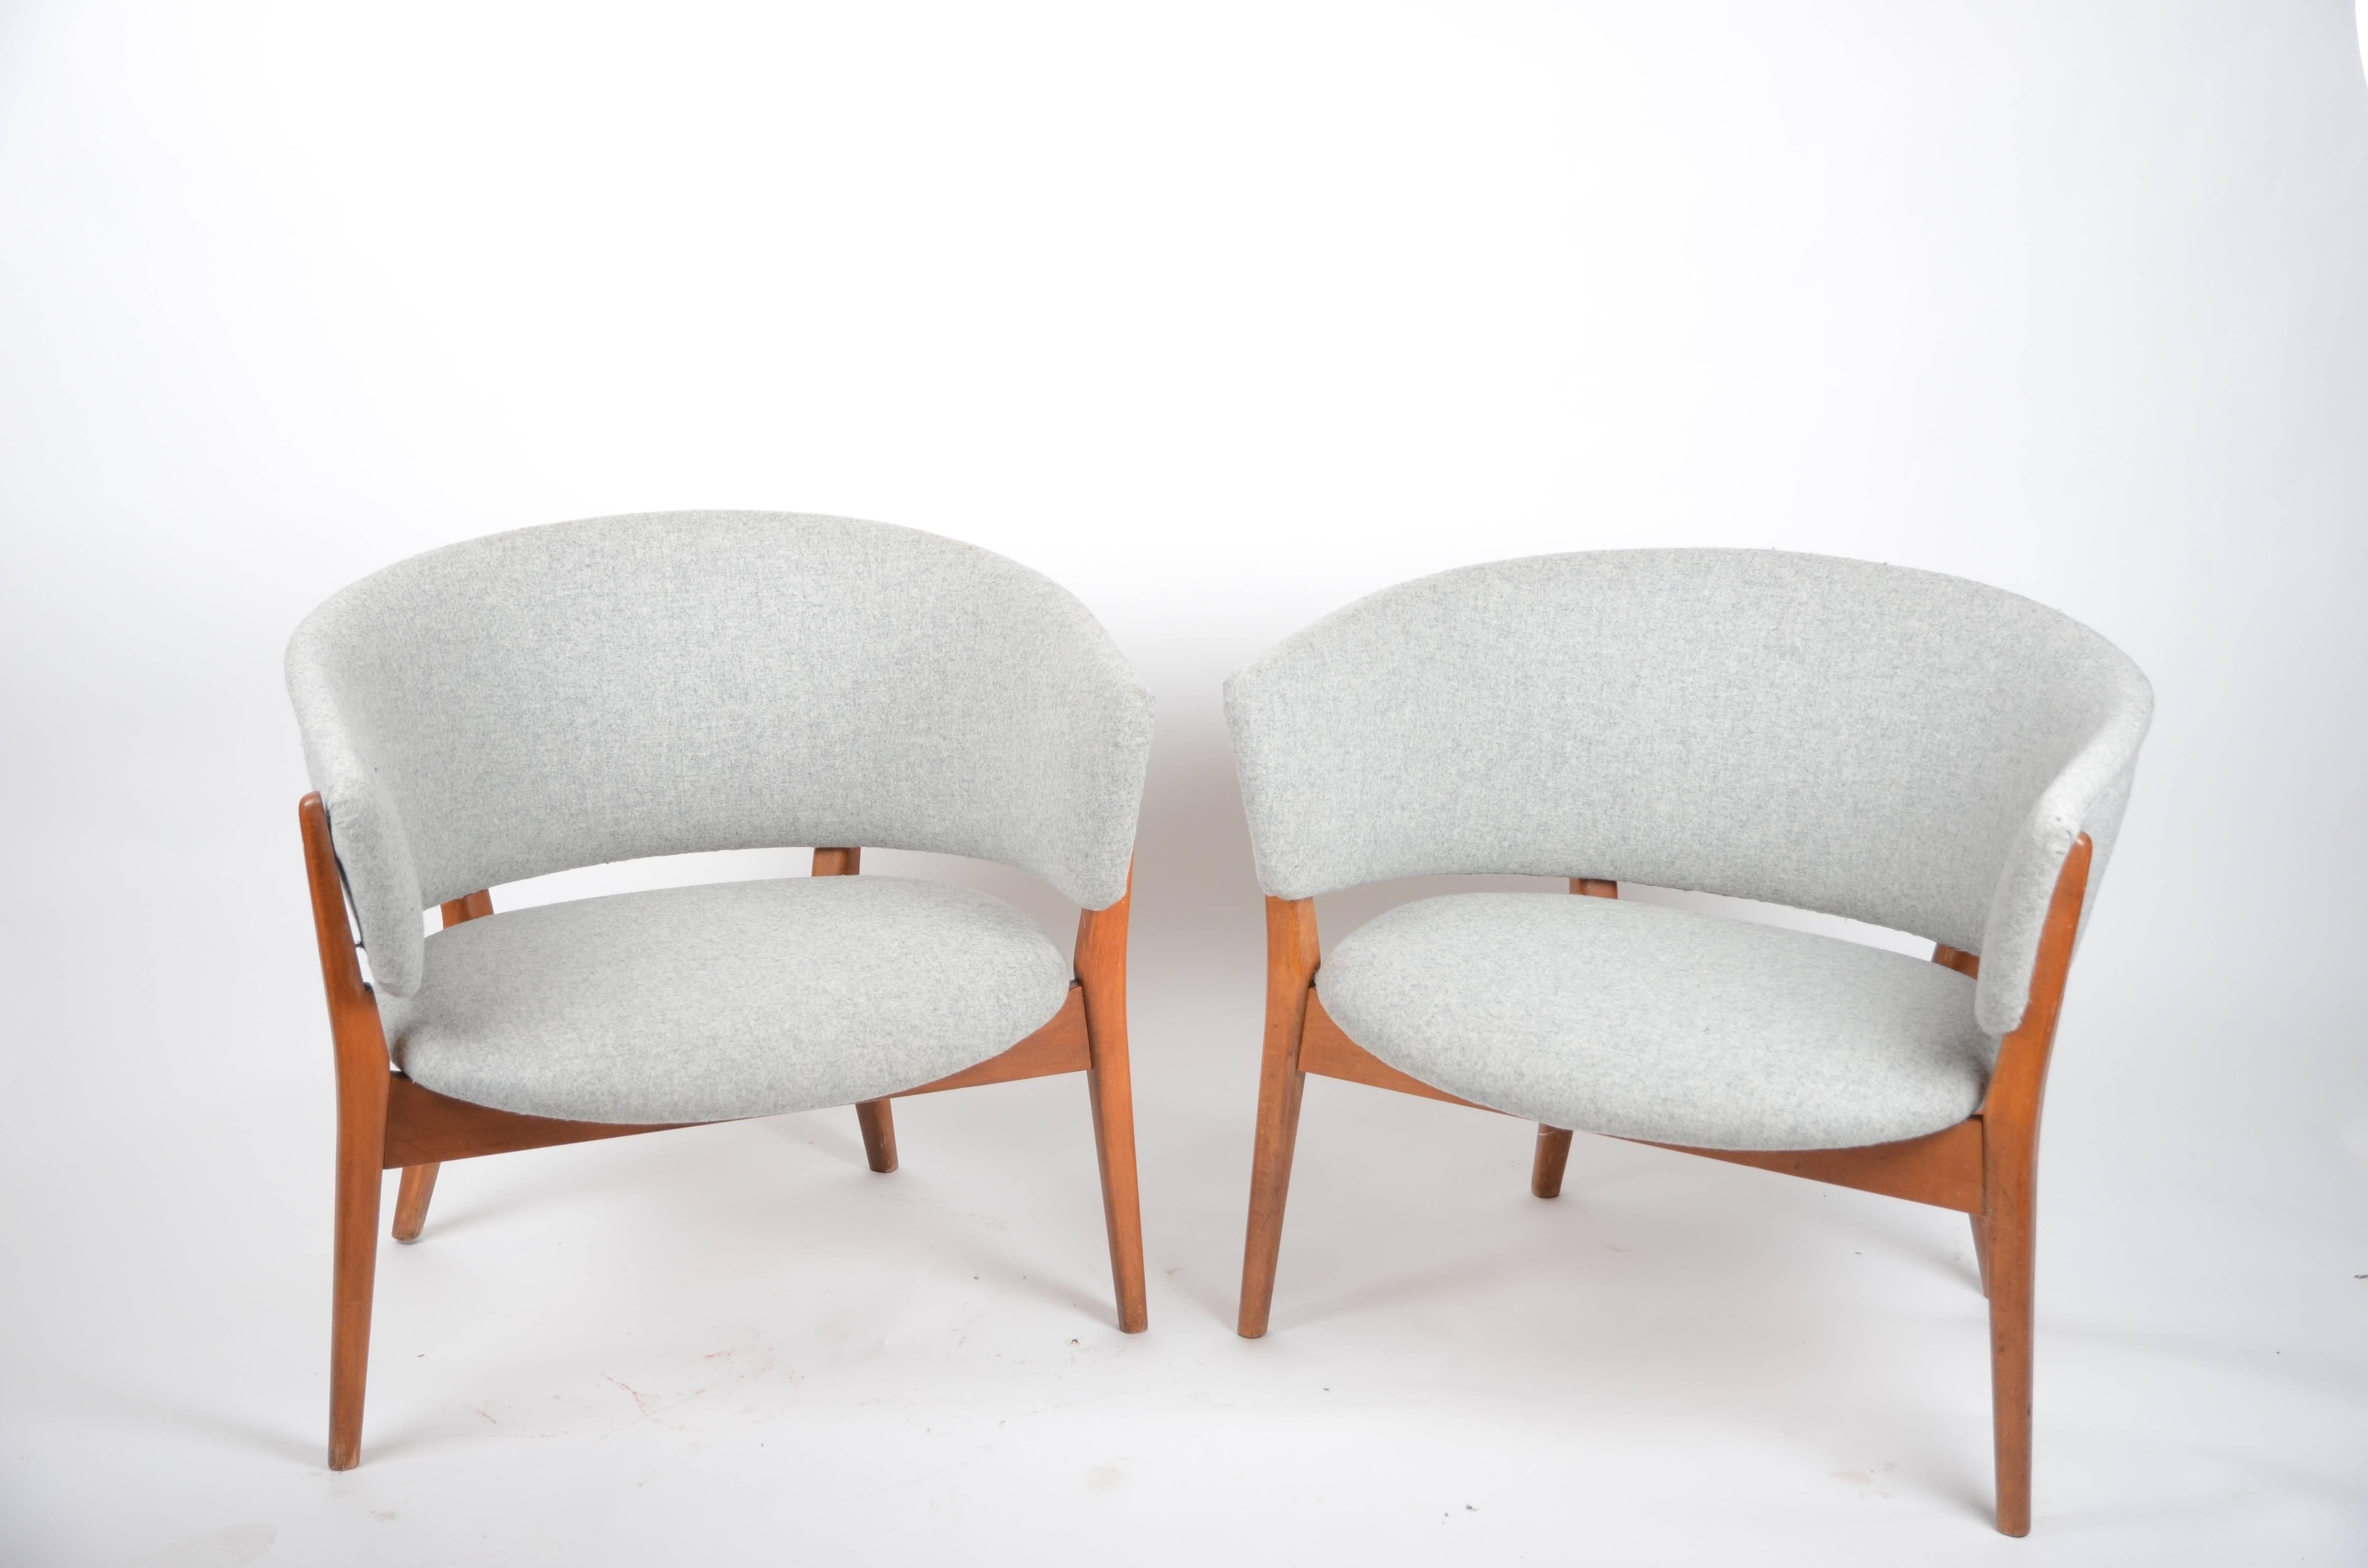 A pair of armchairs designed by Nanna Ditzel, 1952, model ND 83. Reupholstered in wool fabric.